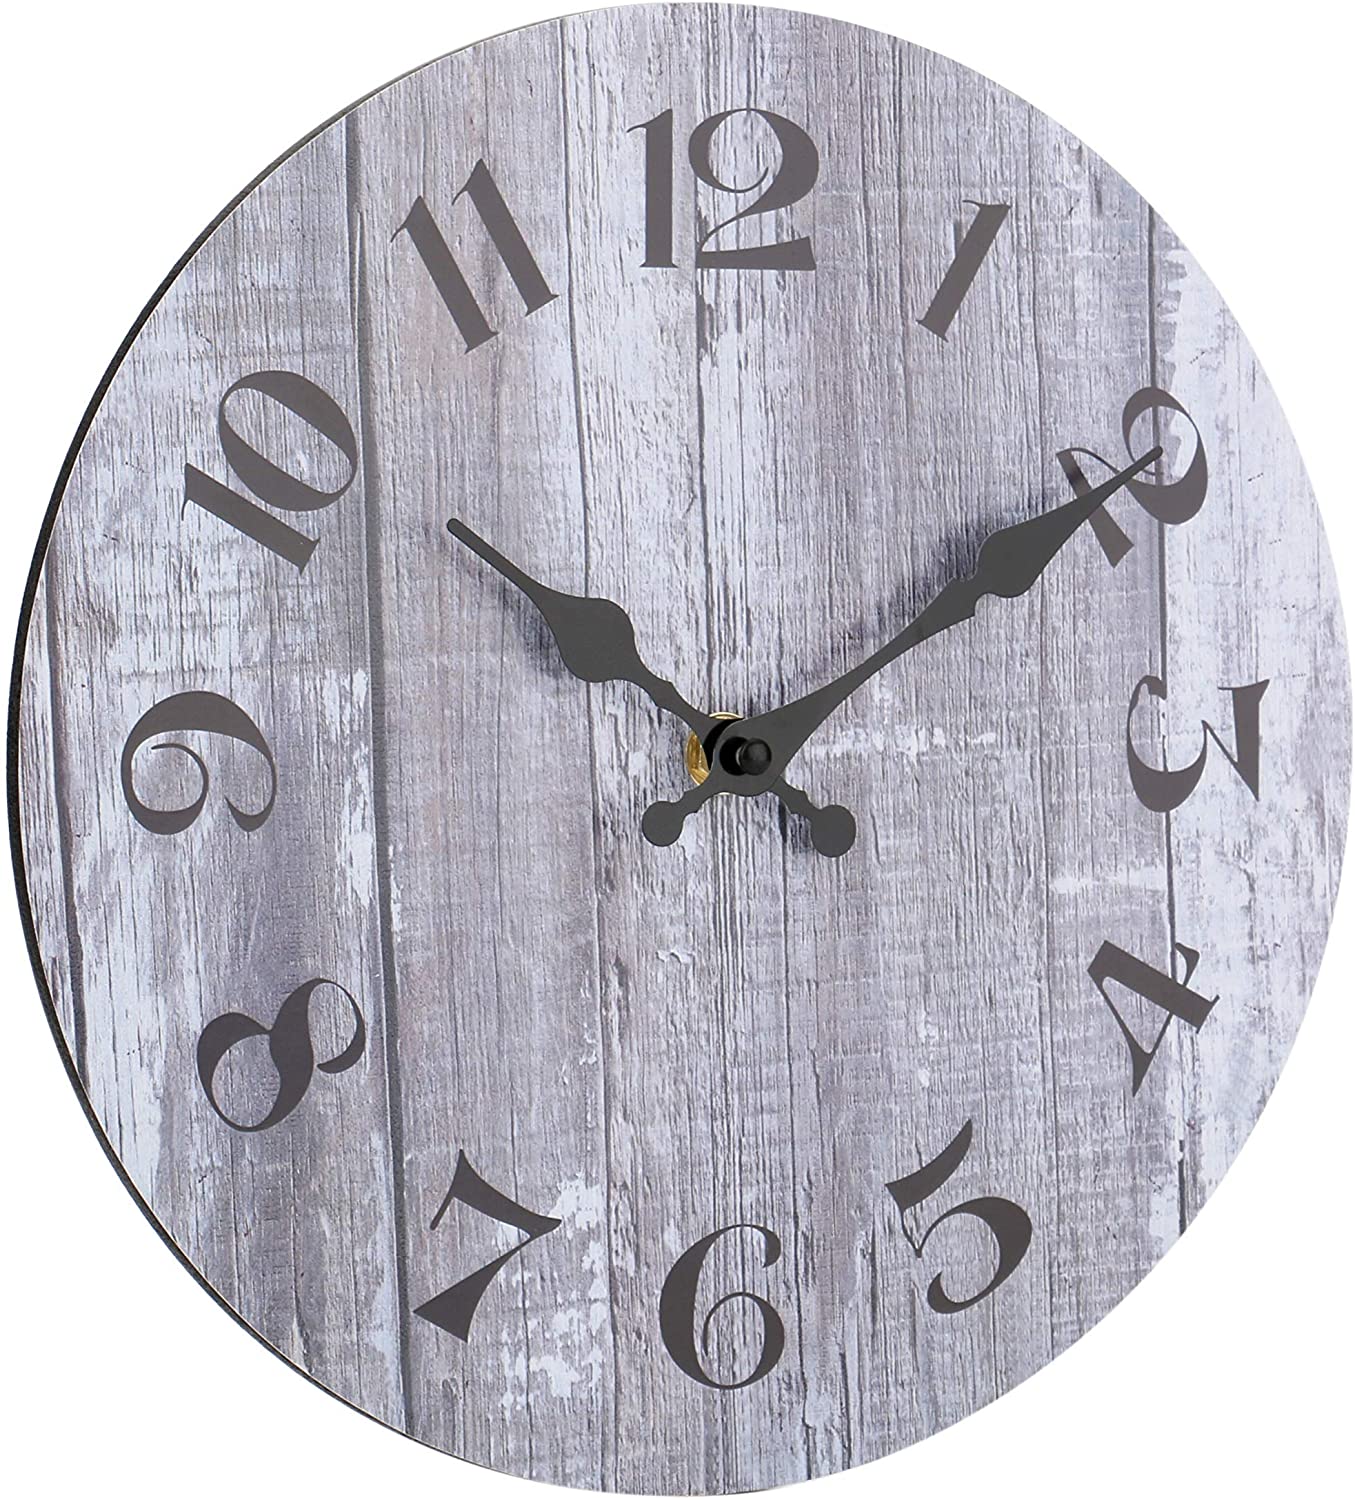 2008-10in-gray Silent Non-Ticking Wooden Decorative Round Wall Clock Quality Quartz Battery Operated Wall Clocks Vintage Rustic Country Tuscan Style Gray Wooden Home Decor Round Wall Clock (10 Inch )